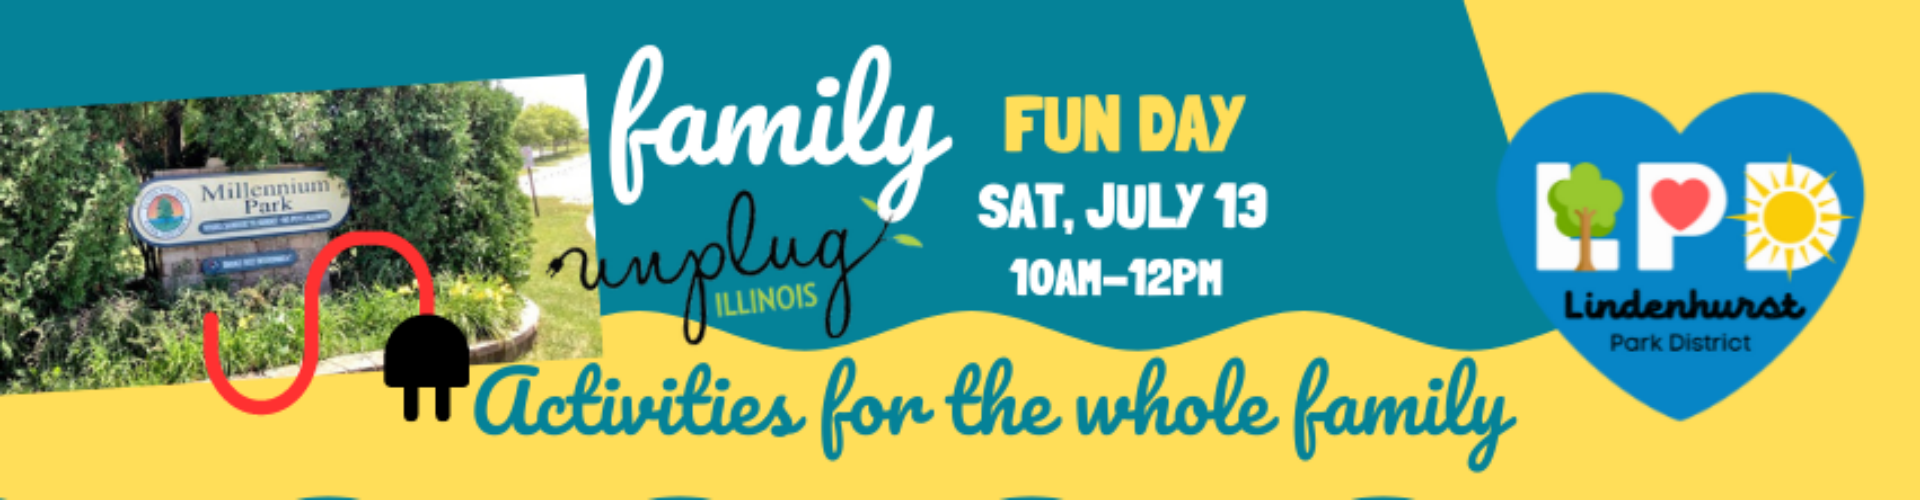 Banner for Family Fun Day on Saturday, July 13, from 10 AM to 12 PM, featuring activities for the whole family, presented by the Lindenhurst Park District with a backdrop of Millennium Park sign and stylized family figures.